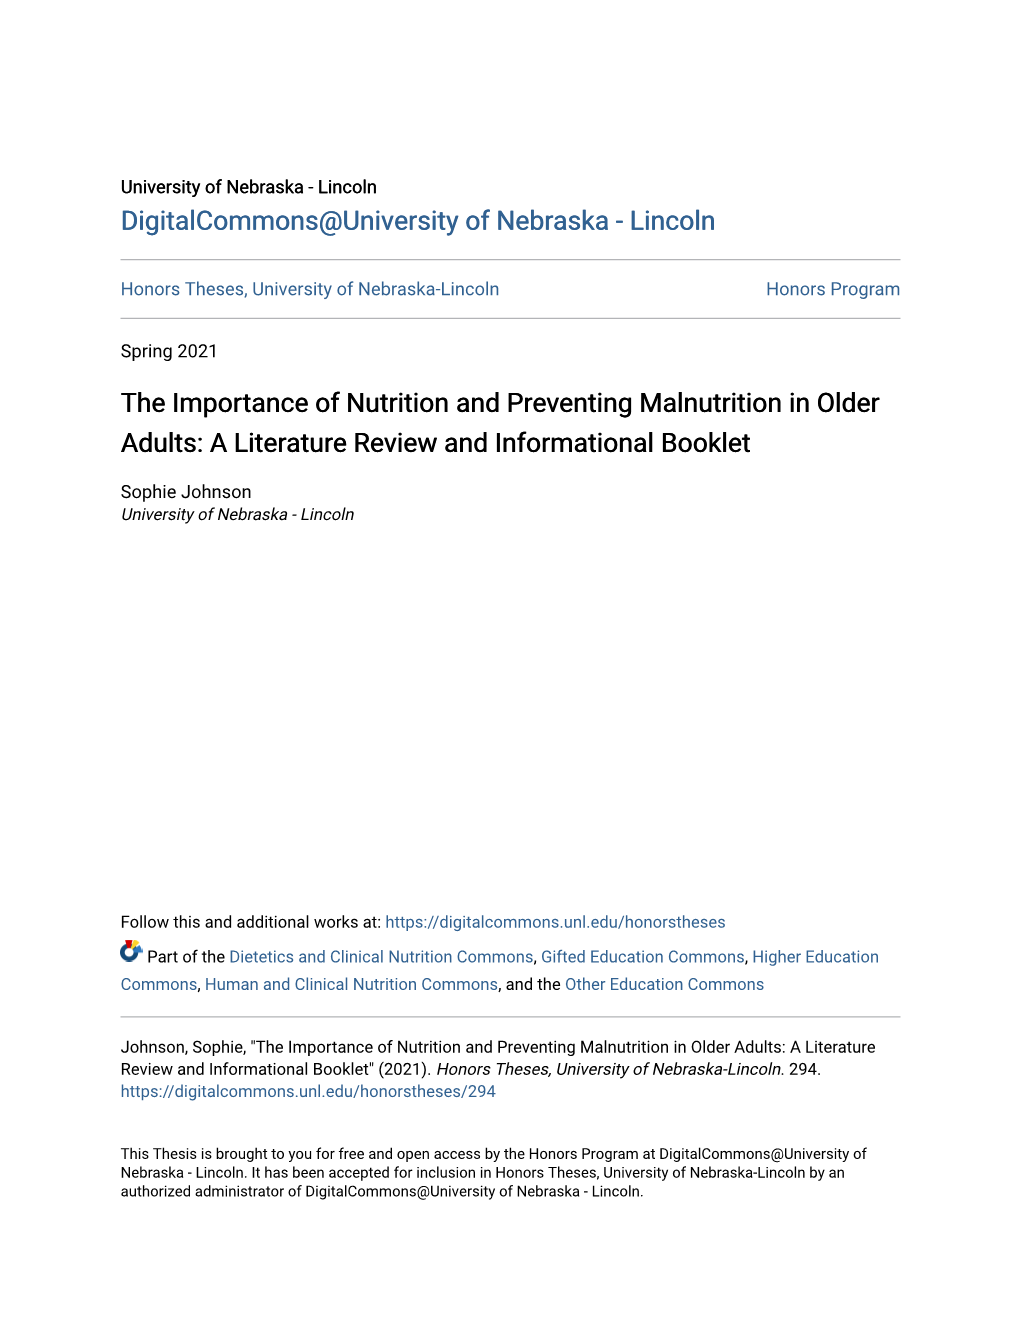 The Importance of Nutrition and Preventing Malnutrition in Older Adults: a Literature Review and Informational Booklet